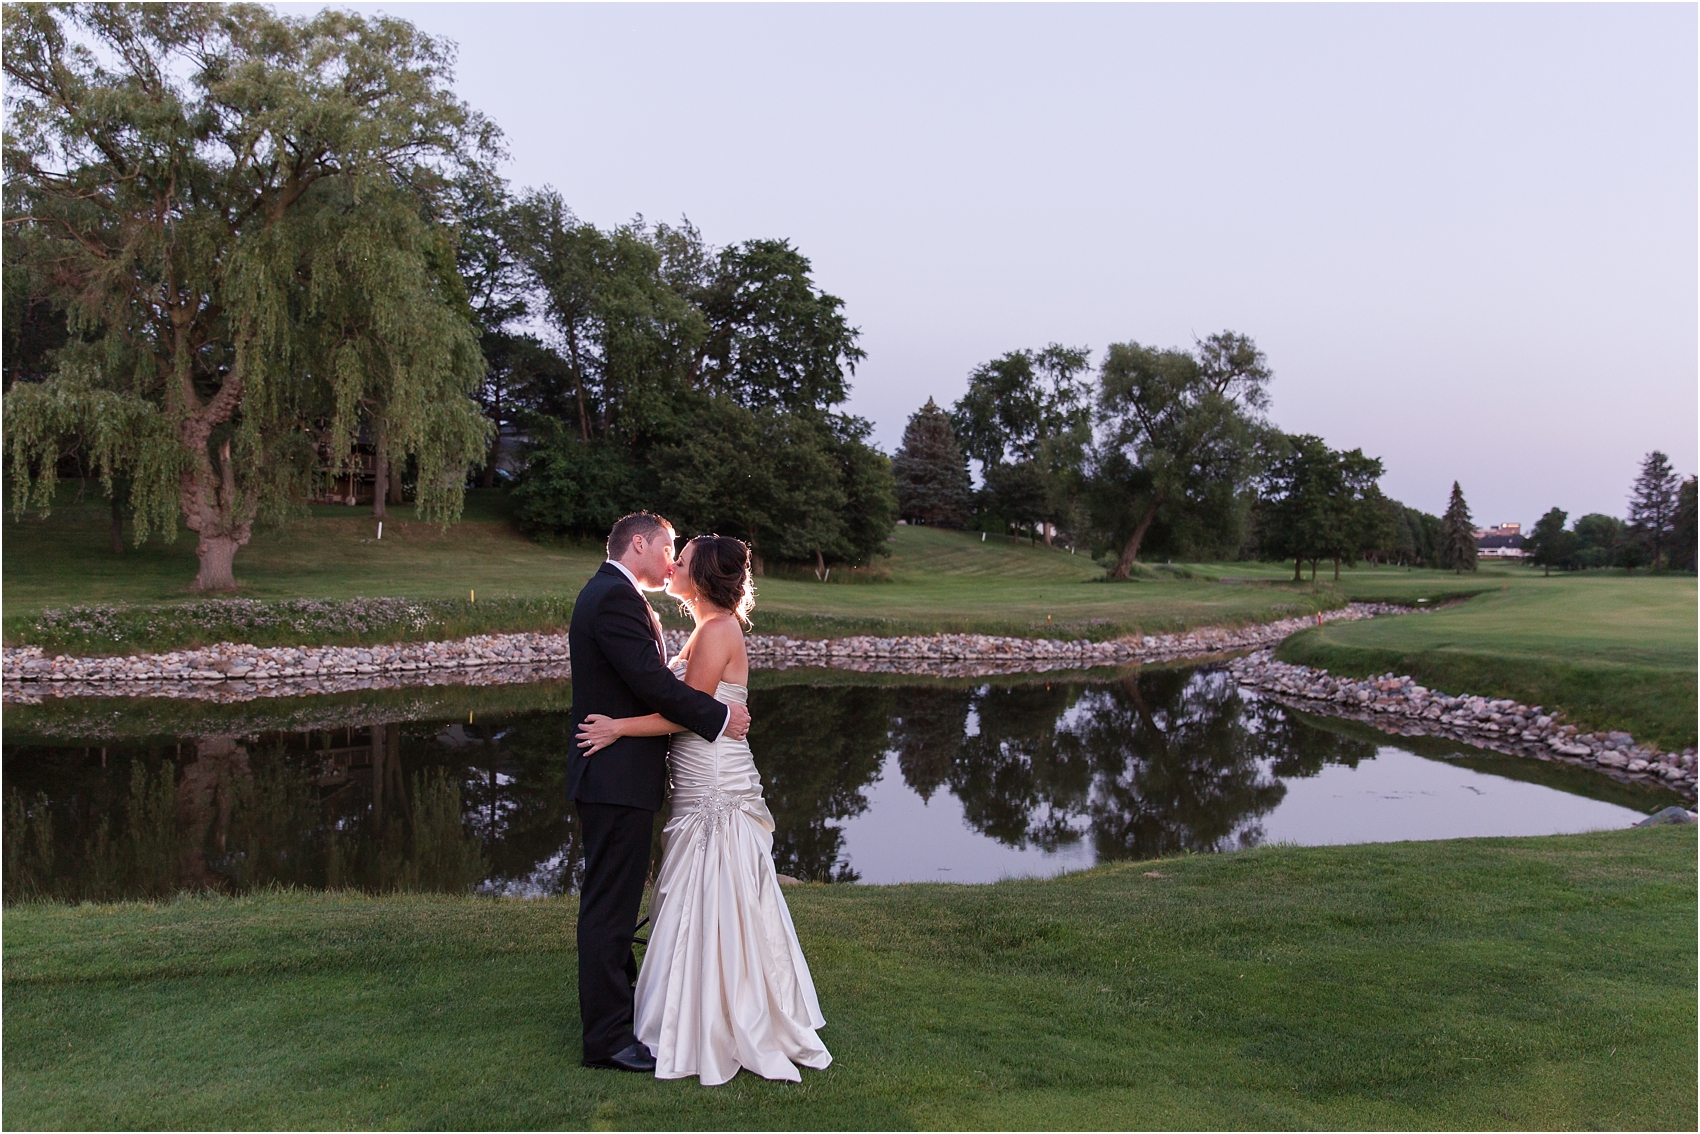 classic-wedding-photos-at-great-oaks-country-club-in-rochester-hills-mi-by-courtney-carolyn-photography_0115.jpg